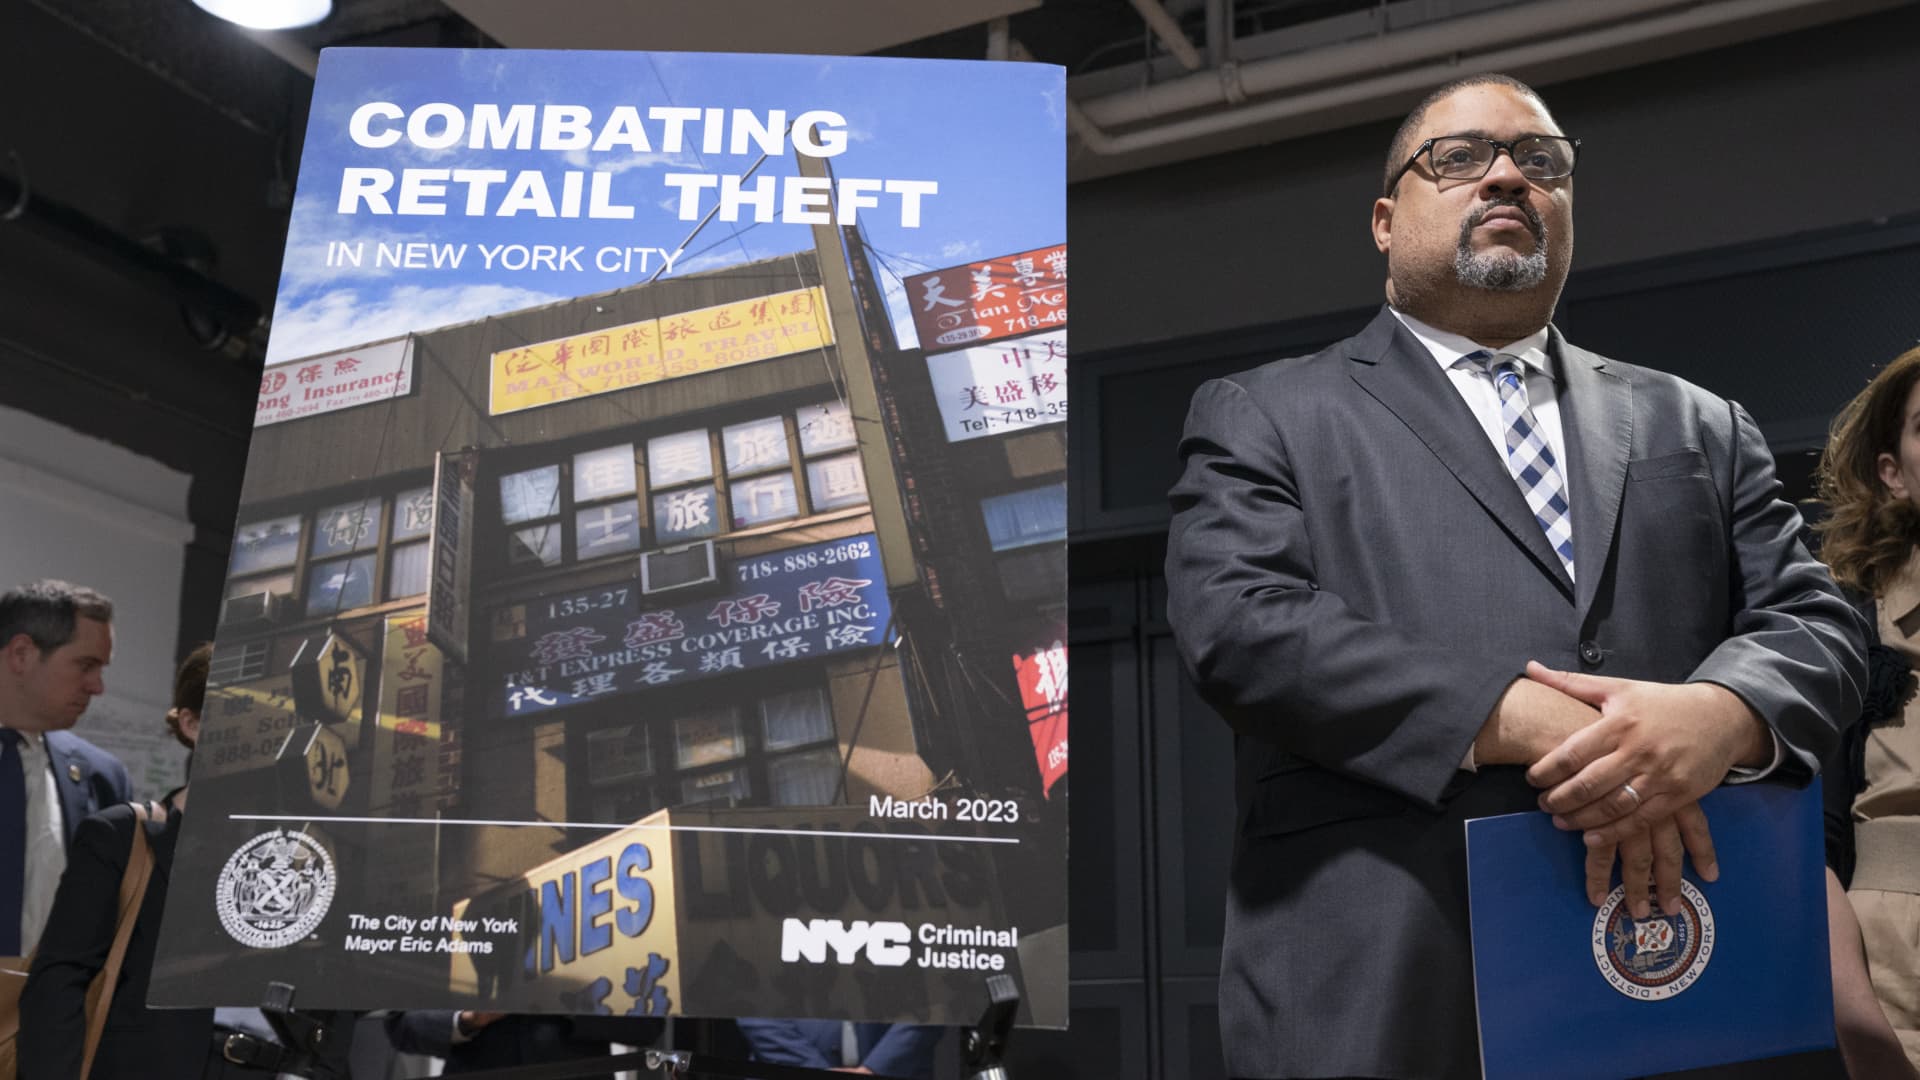 Manhattan DA Alvin Bragg is pictured during a press conference related to reducing shoplifting Wednesday, May, 17, 2023 in Manhattan, New York.